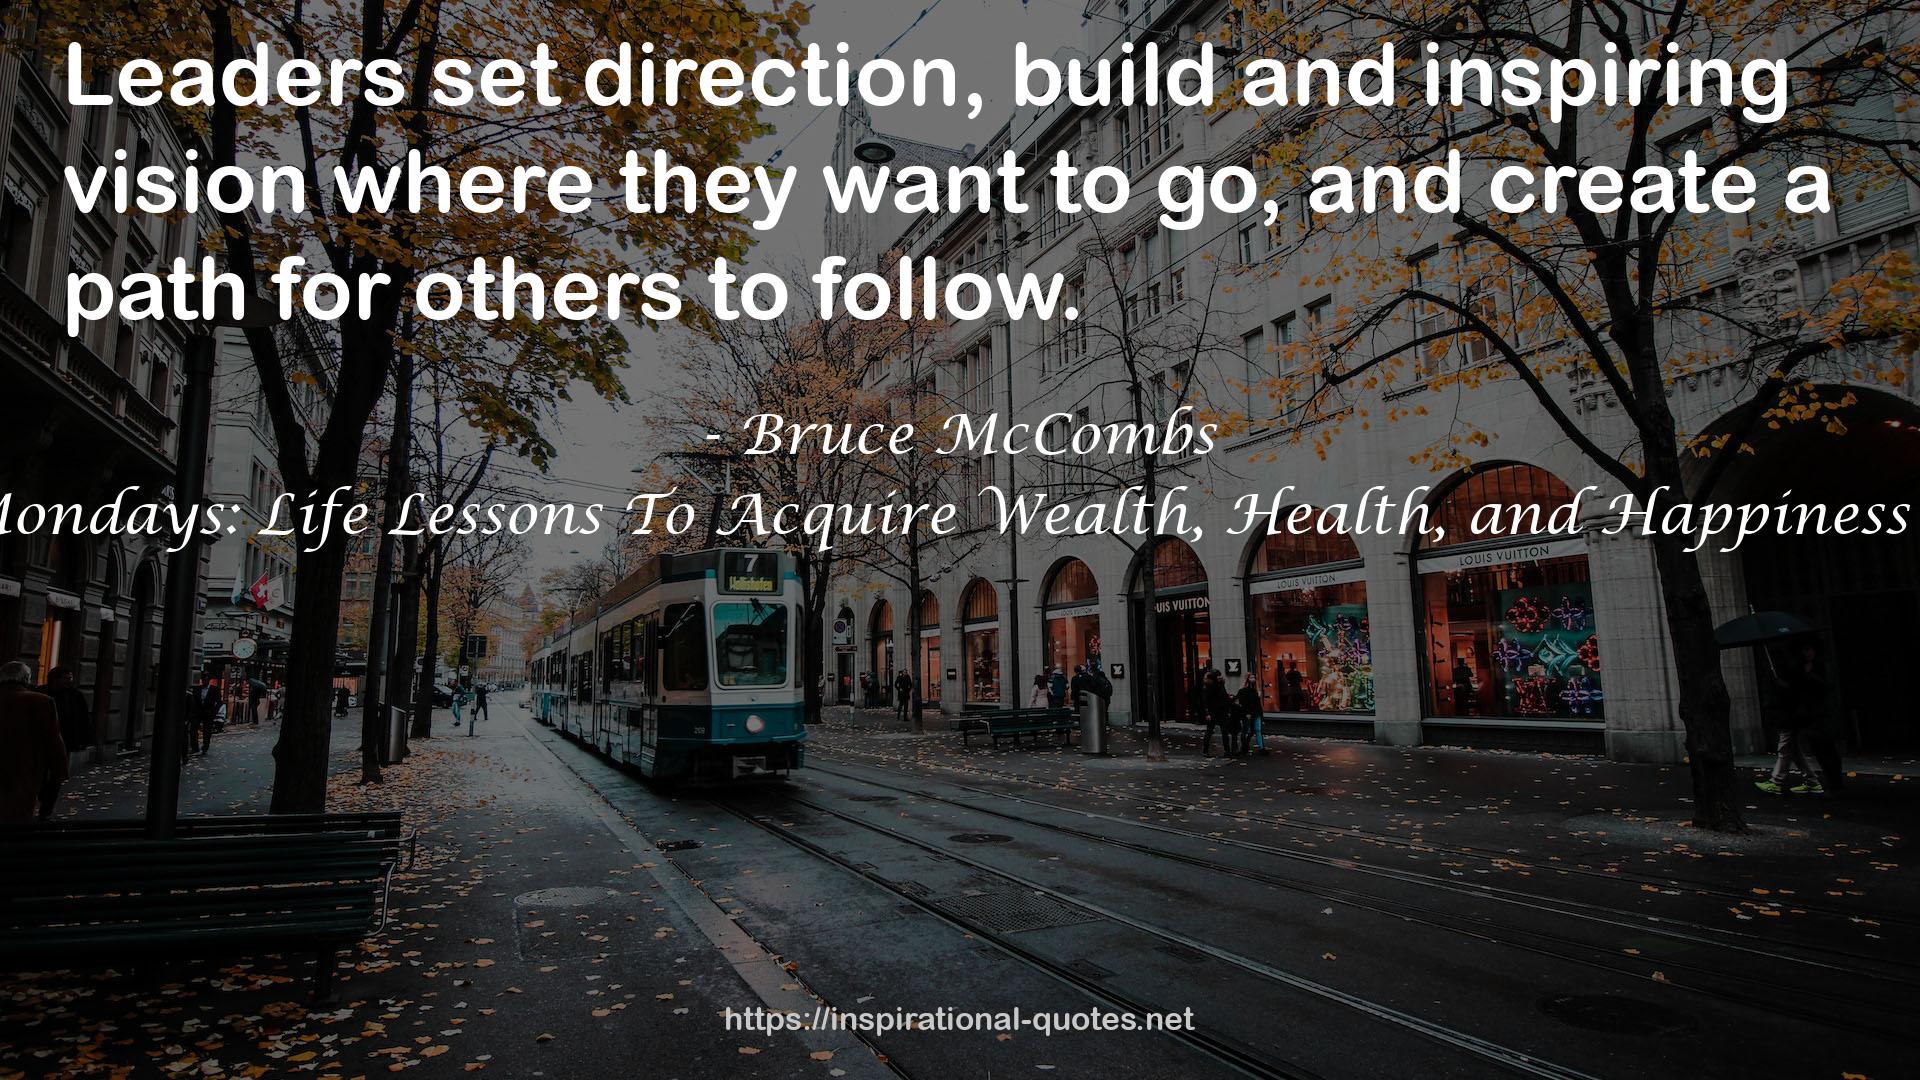 Bruce McCombs QUOTES